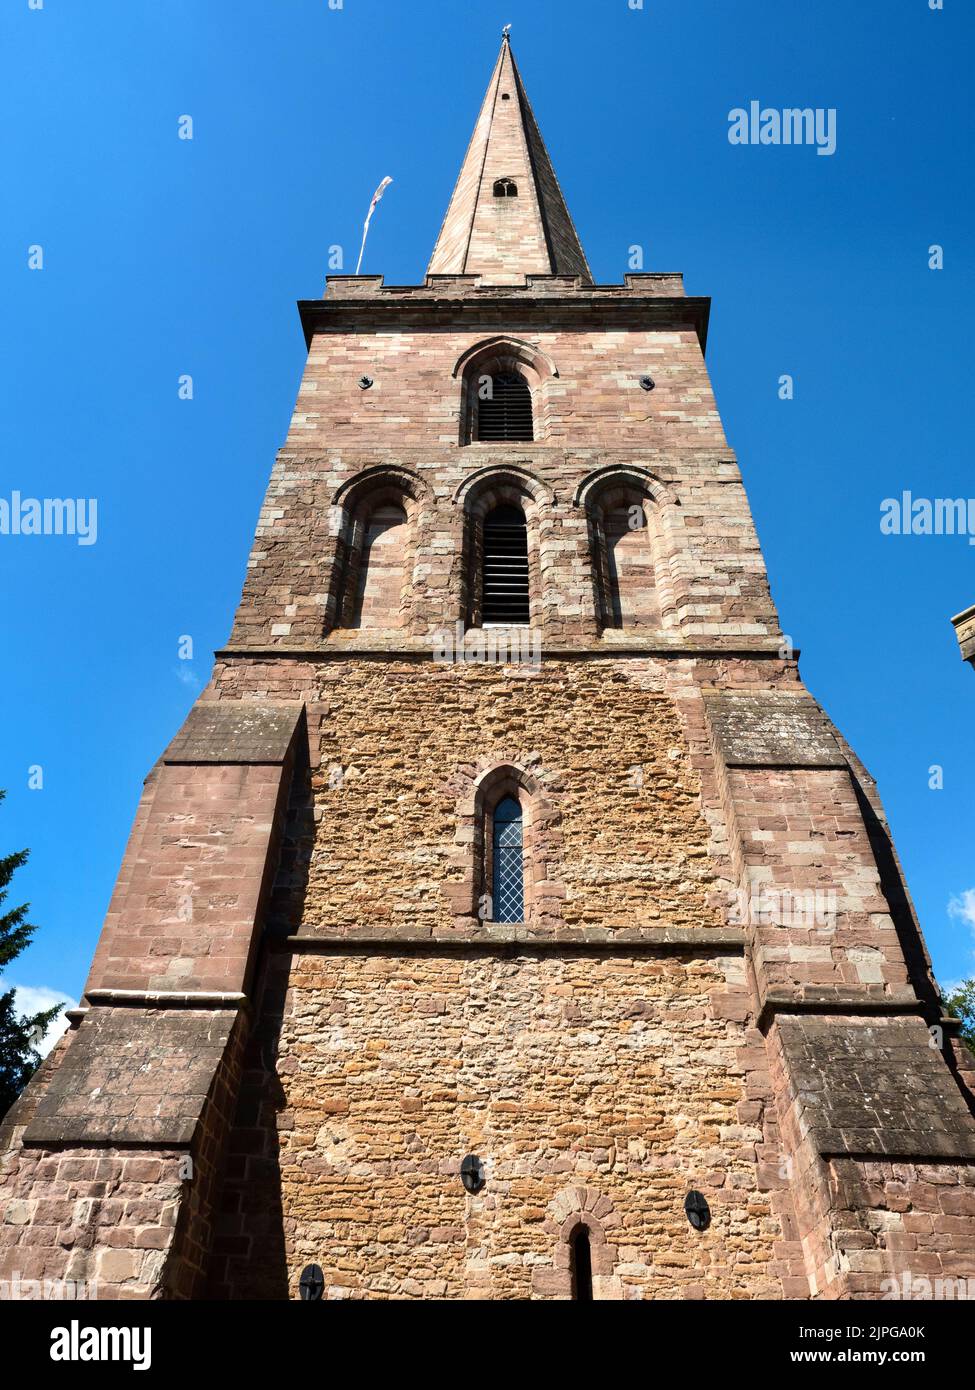 Detached bell tower at the Church of St Michael and All Angels at Ledbury Herefordshire England Stock Photo